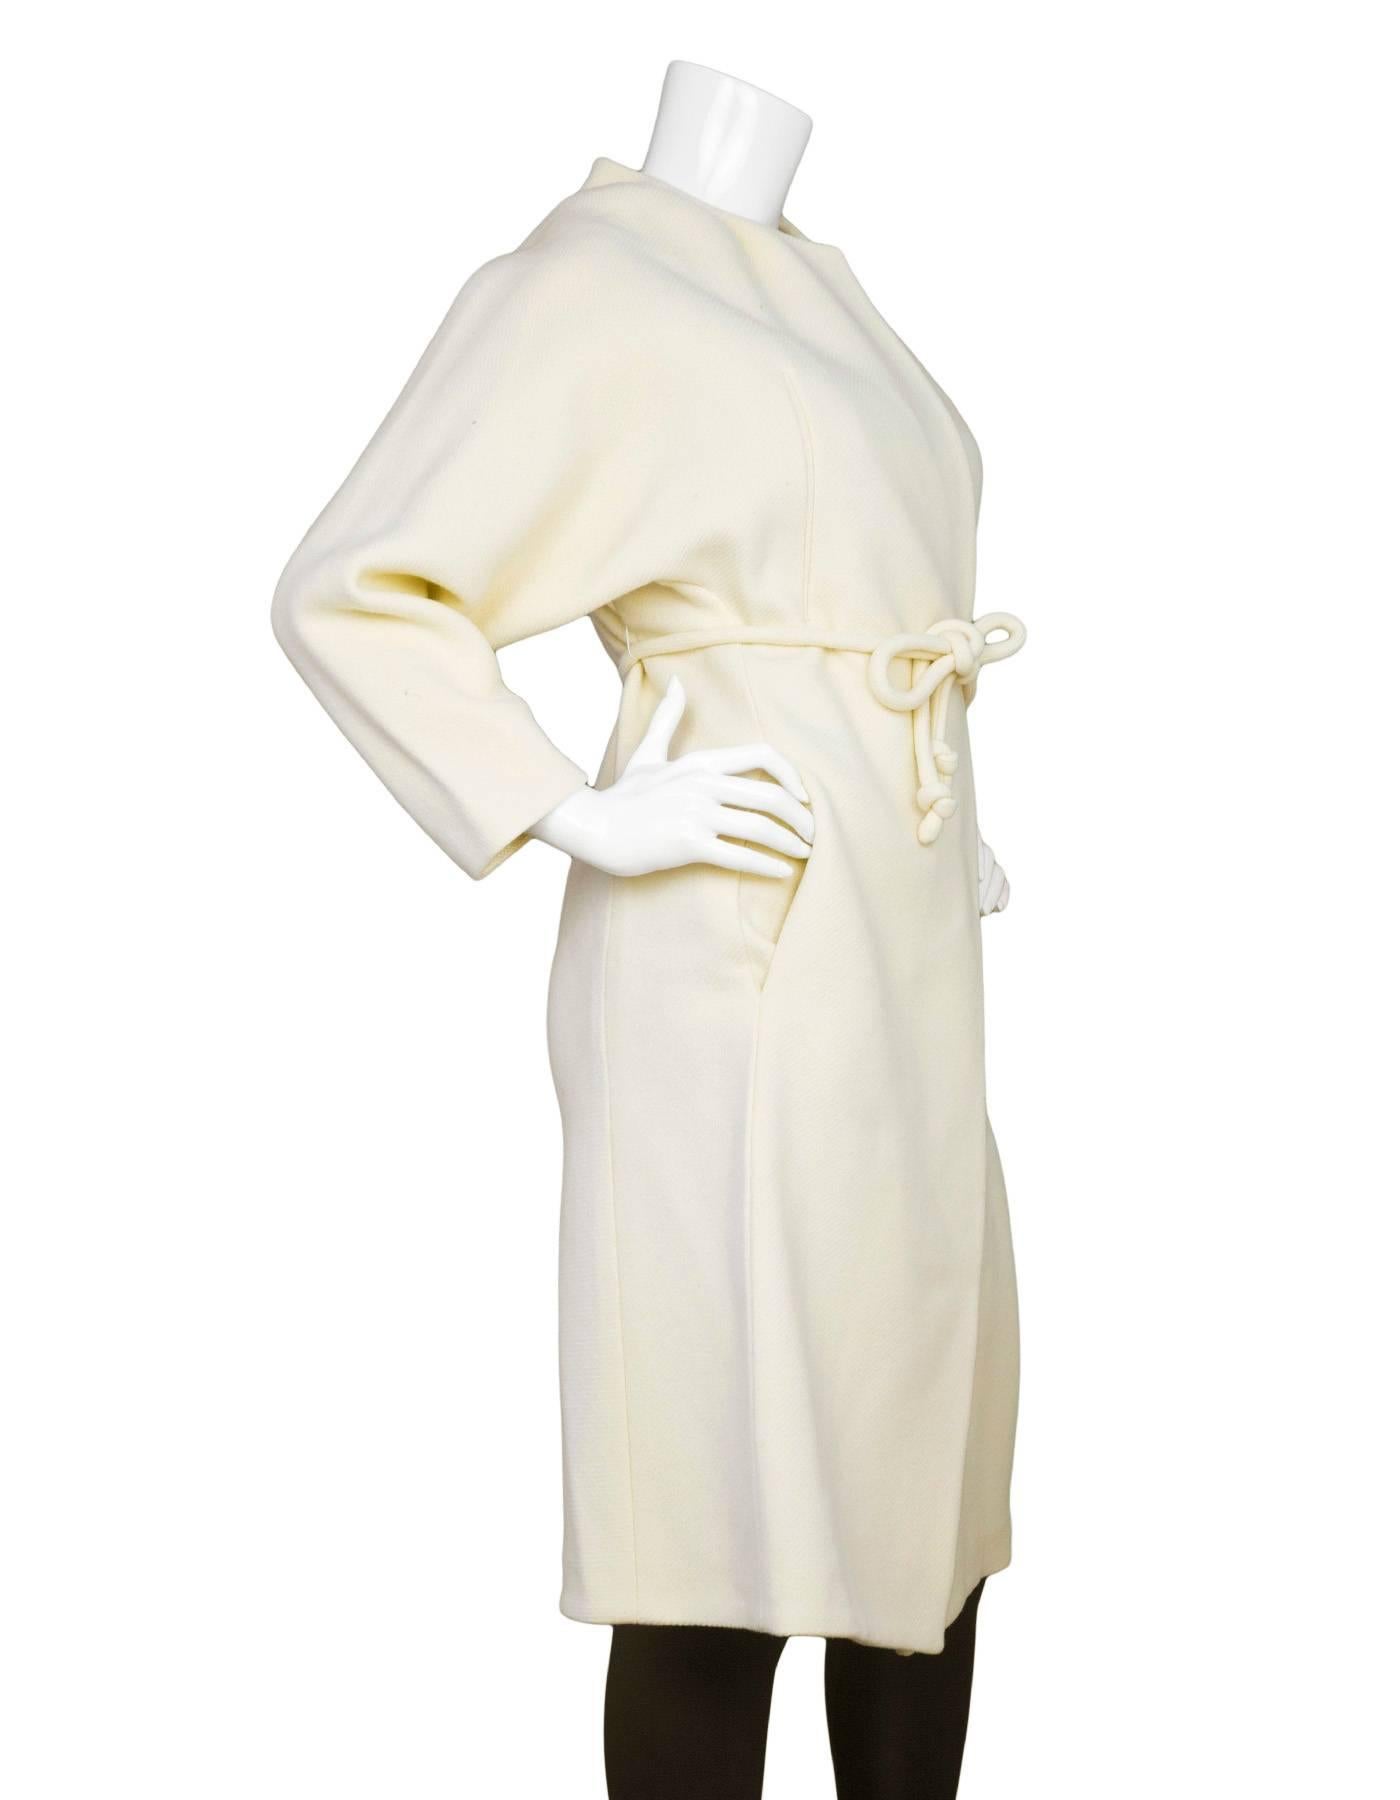 Chloe Cream Wool Long Belted Coat sz FR36
Features matching waist tie and interior draw string for cinching waist
Made In: France
Color: Cream
Composition: 80% Virgin wool, 20% polyamide
Lining: 100% Viscose
Closure/Opening: One front waist snap